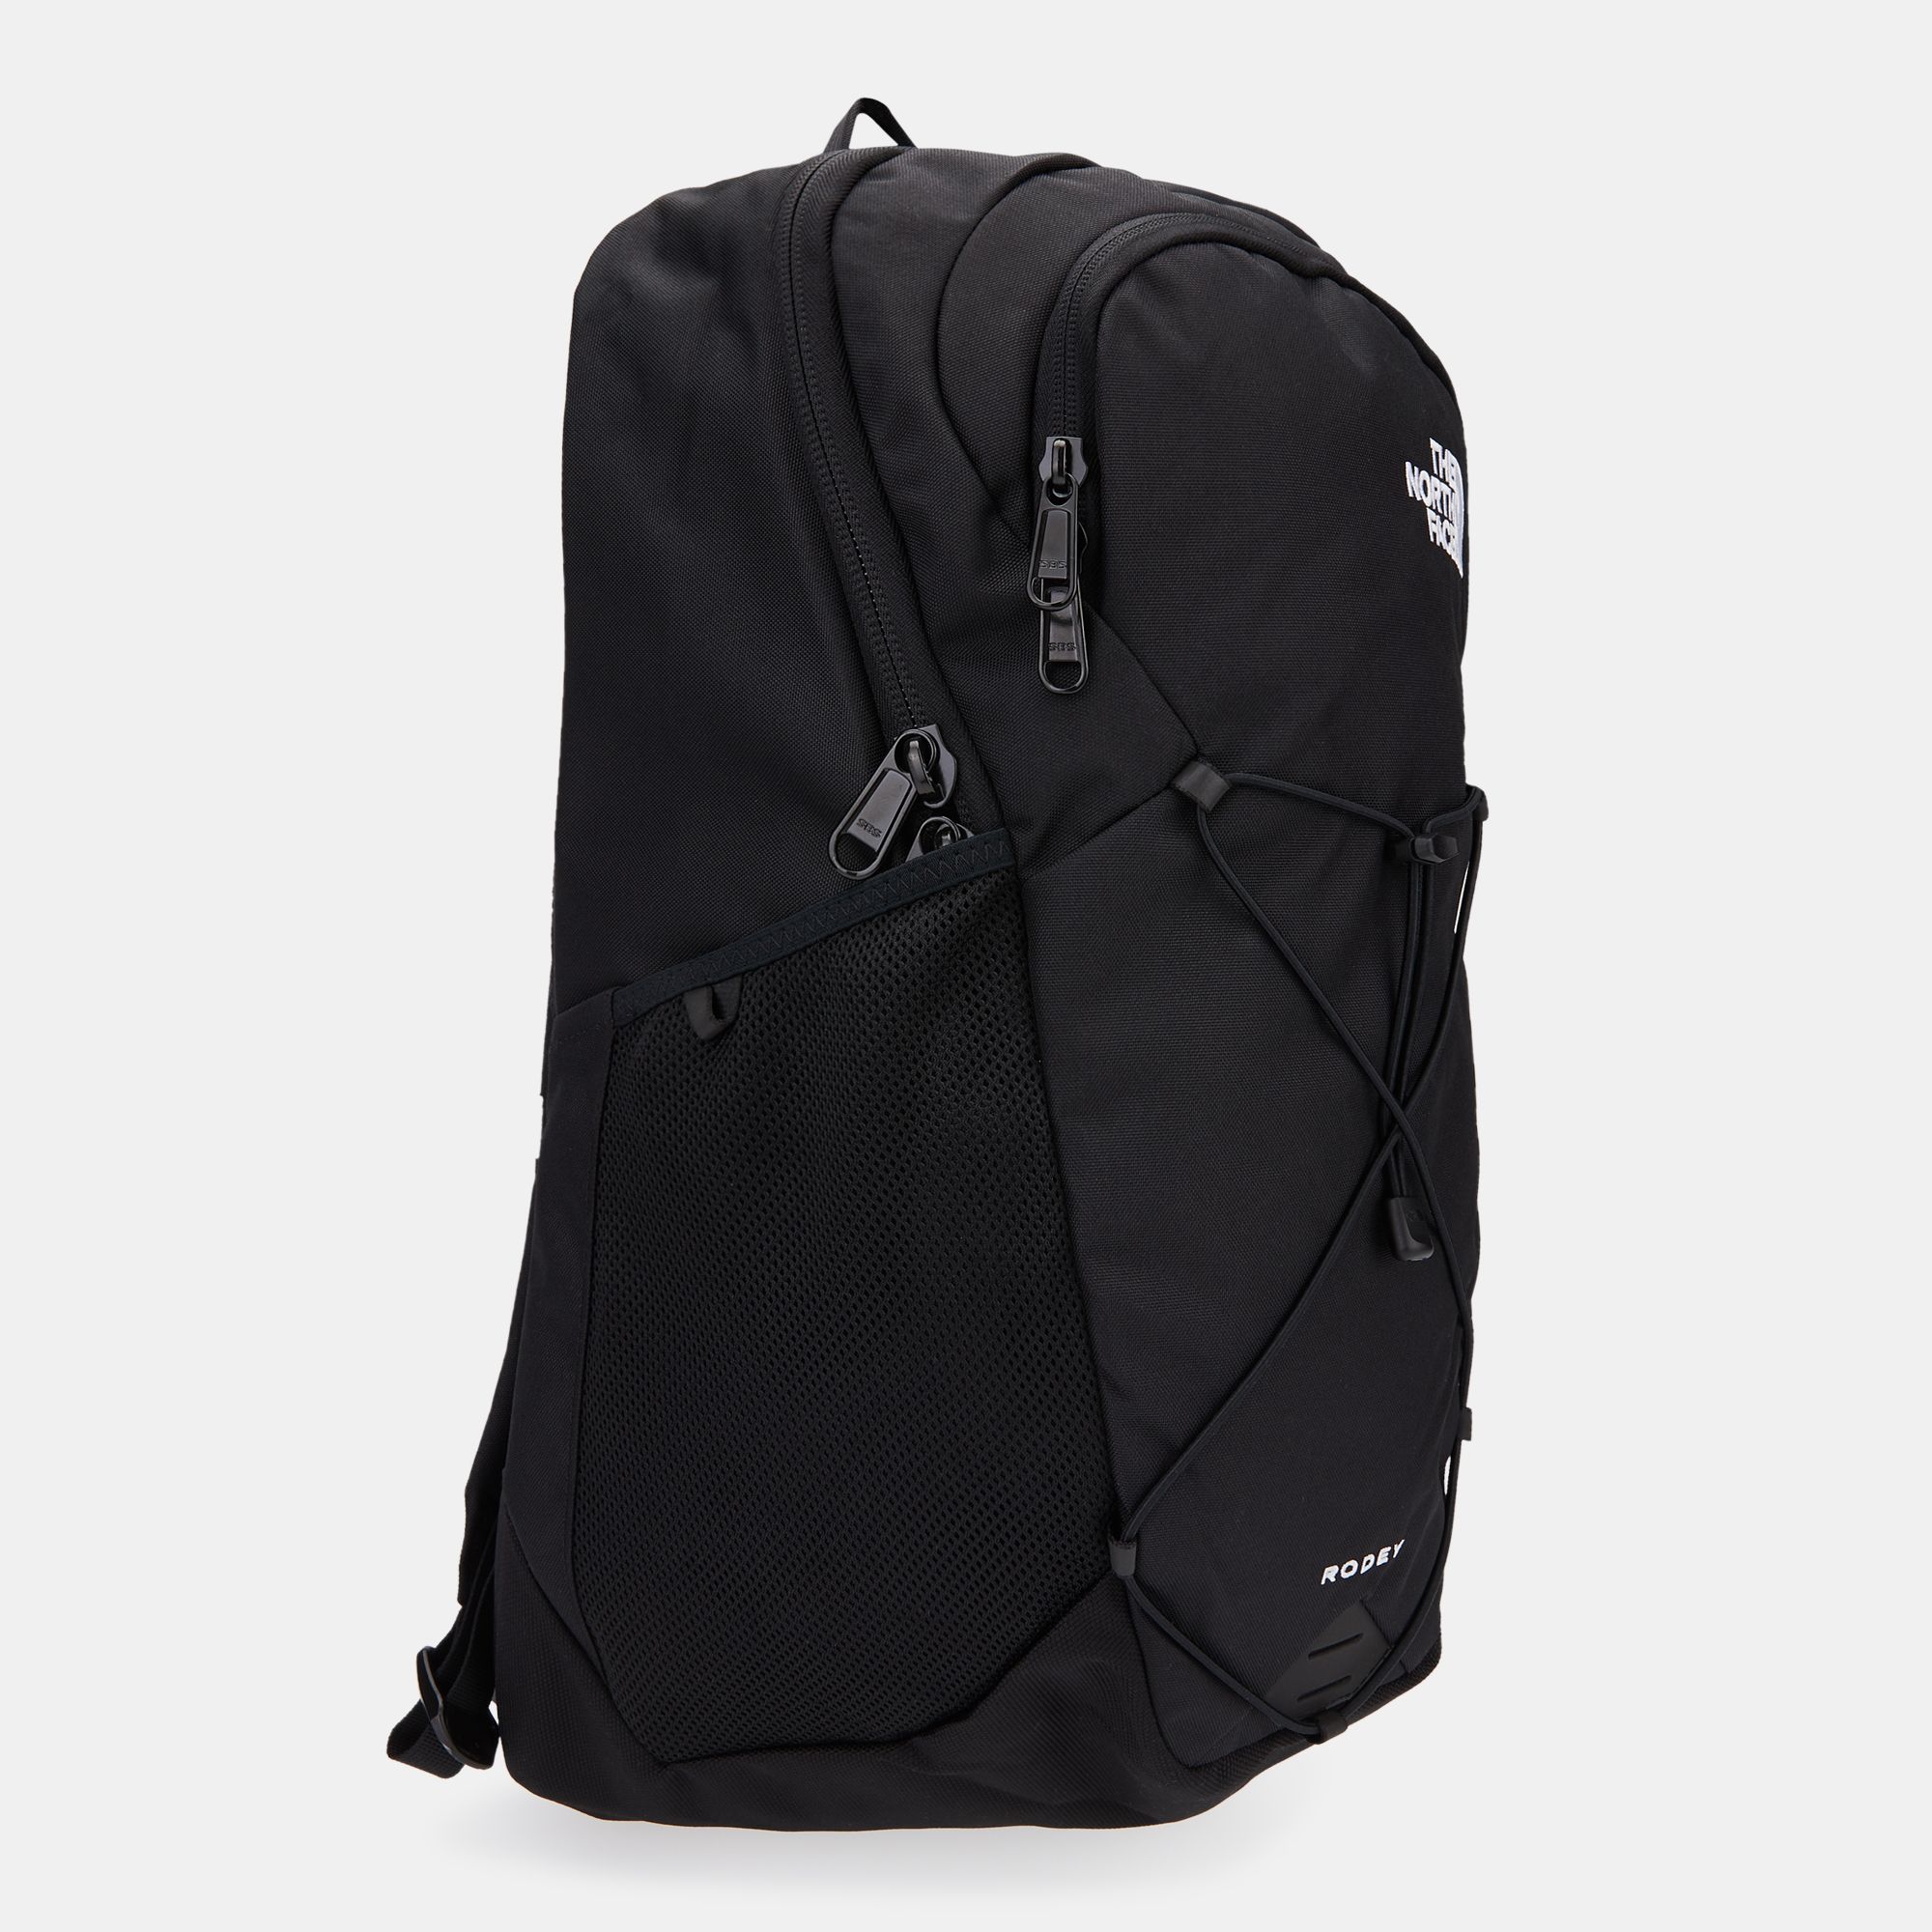 Buy The North Face Rodey Backpack Online in Dubai, UAE | SSS